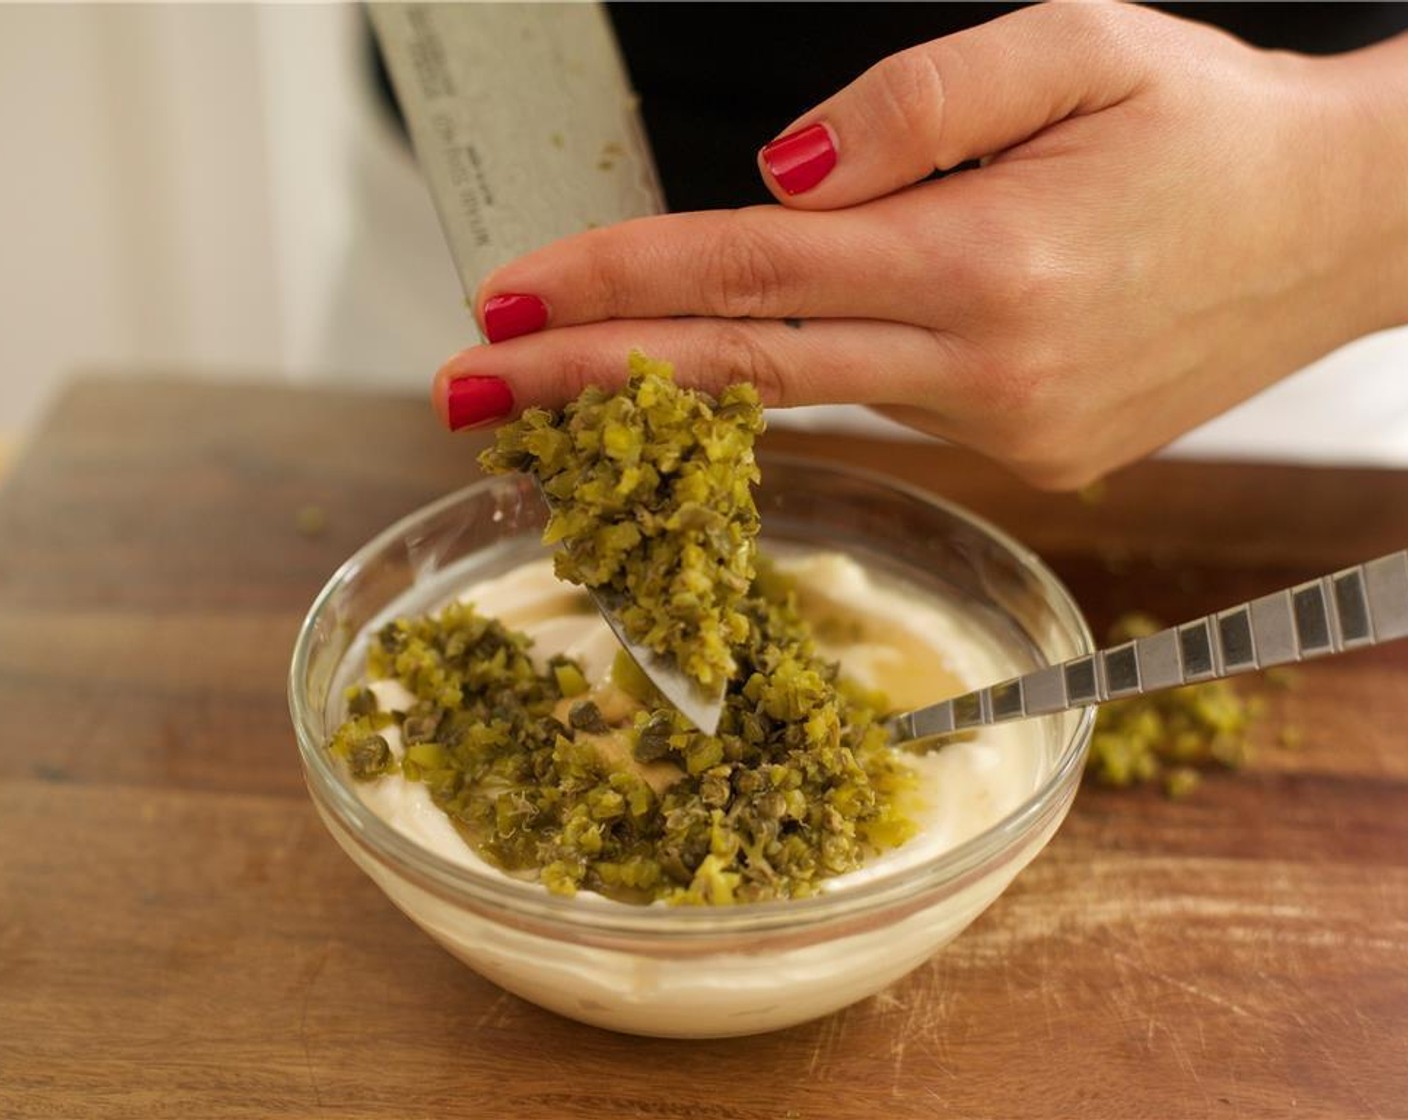 step 5 In a bowl, combine Mayonnaise (3/4 cup), Dijon Mustard (2 Tbsp), Champagne Vinegar (1 Tbsp), pickles and capers. Stir until well blended and place in fridge until plating.